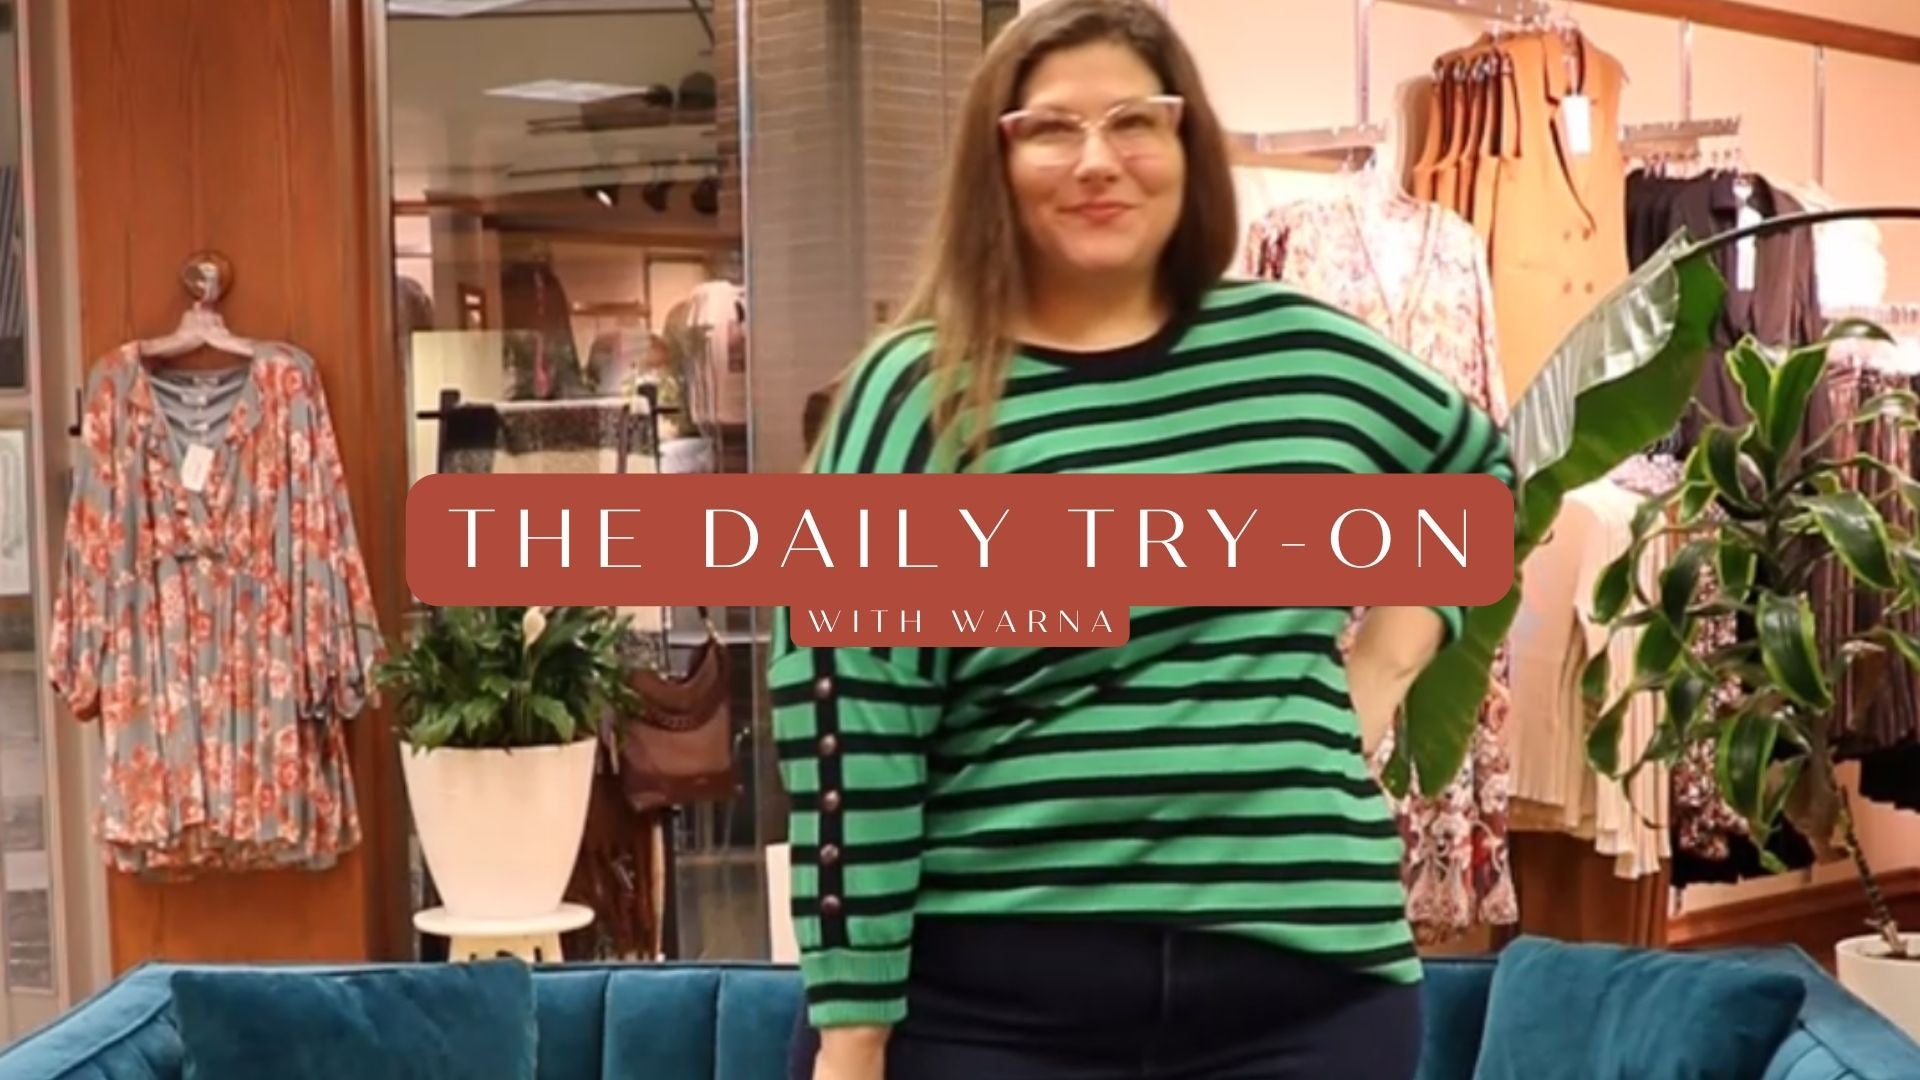 THE DAILY TRY-ON WITH WARNA JANUARY 26TH, 2023